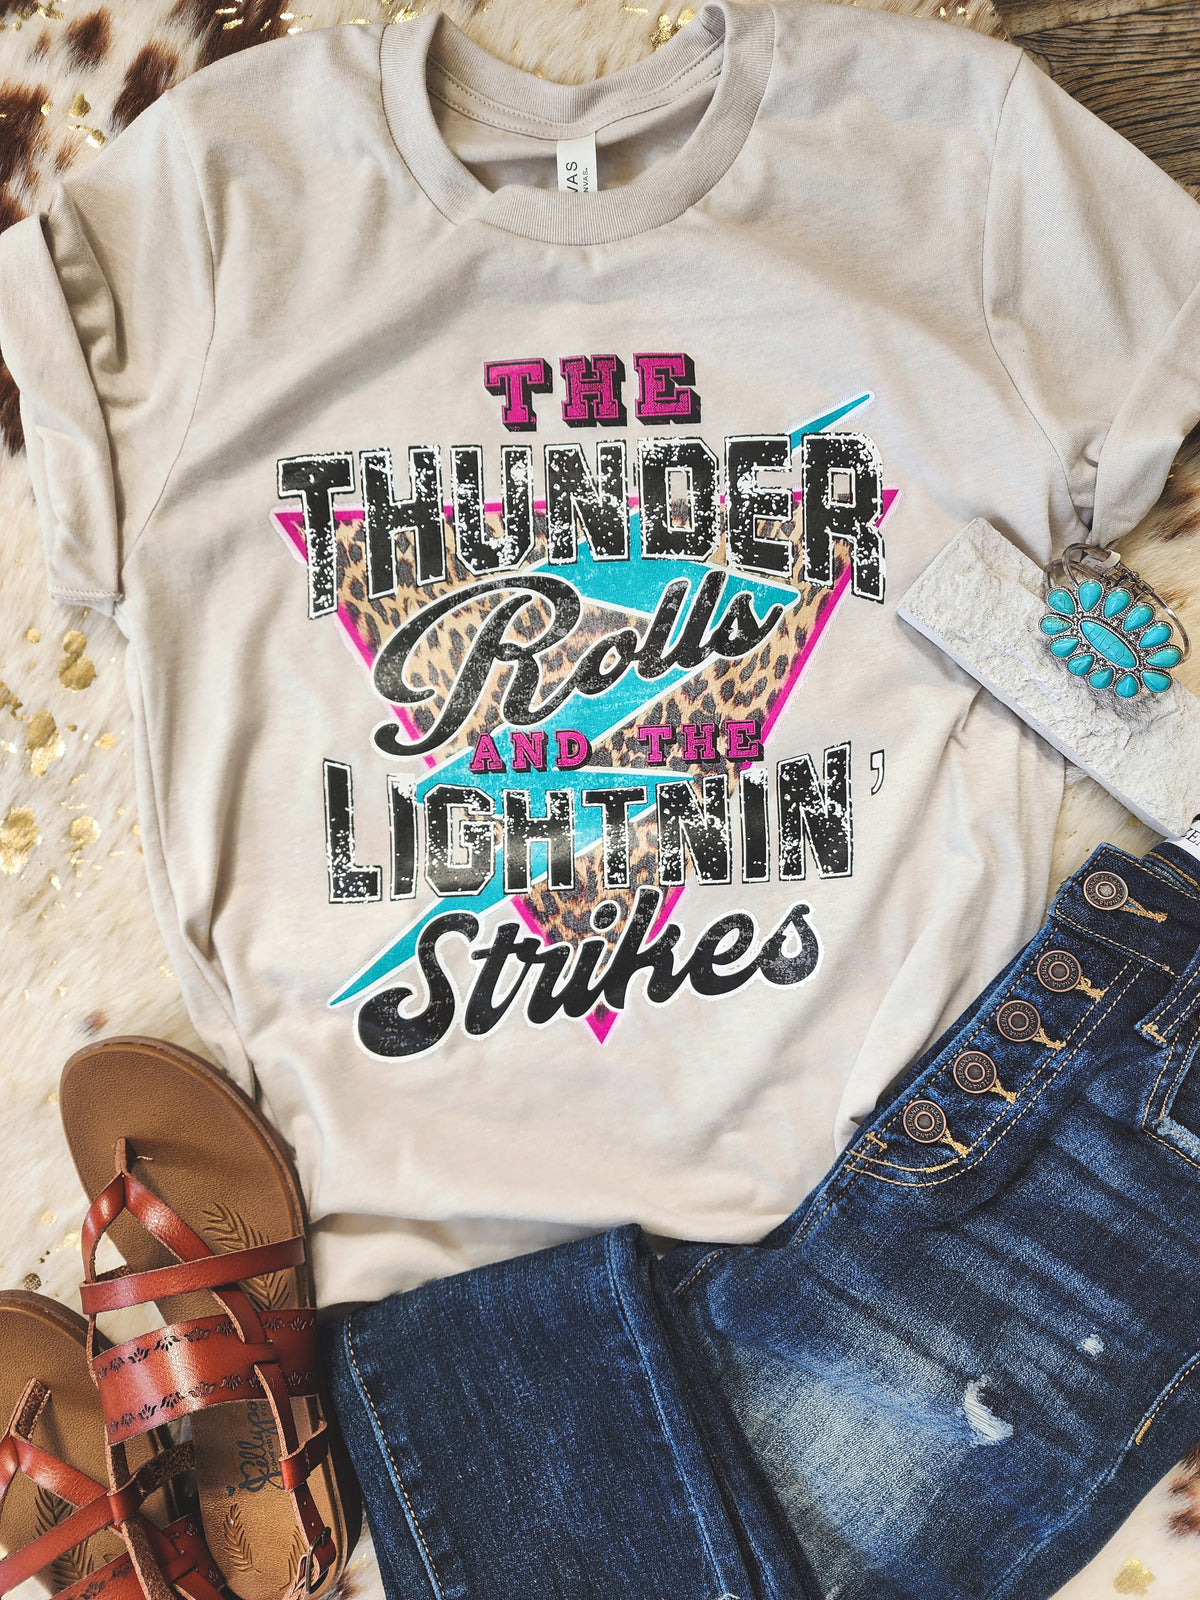 "The Thunder Rolls and the Lightnin' Strikes" graphic tee * on sale